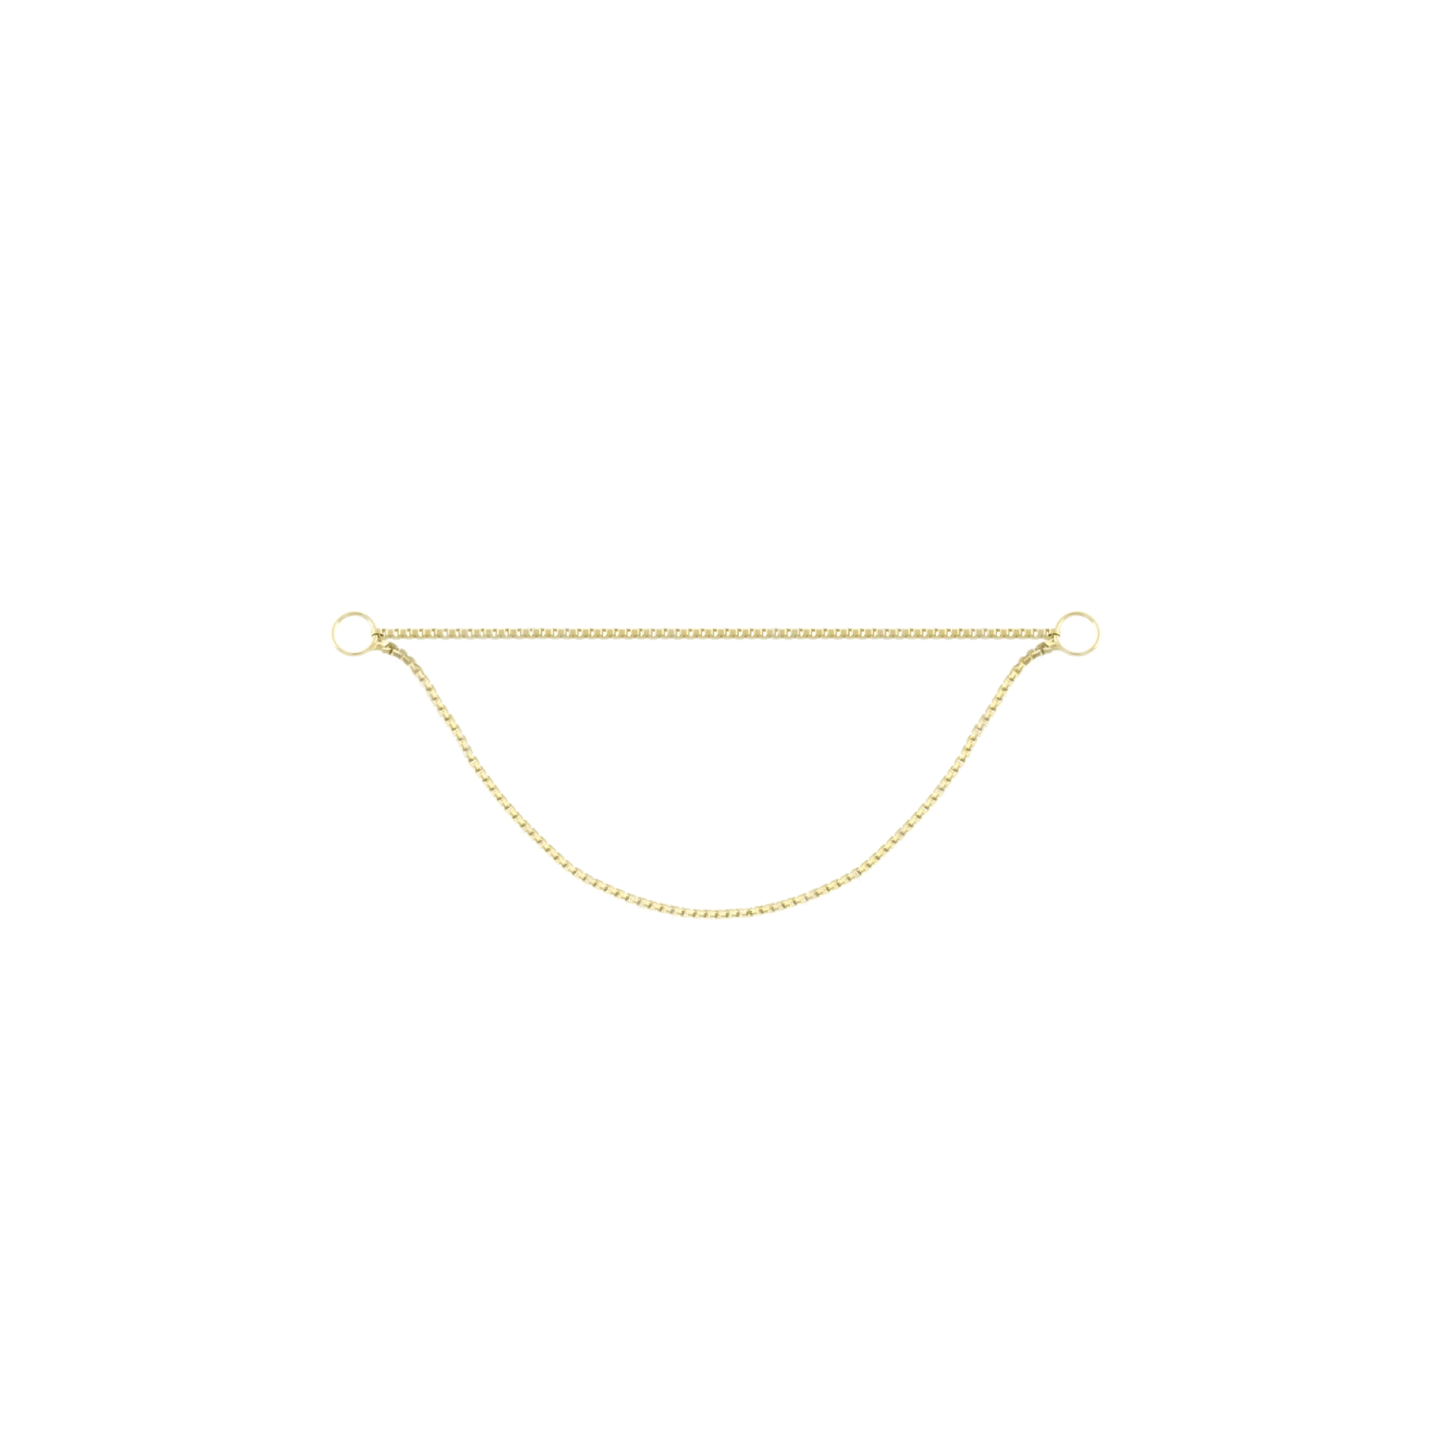 Chain Gold Double Oval Cable, Hanging Chain